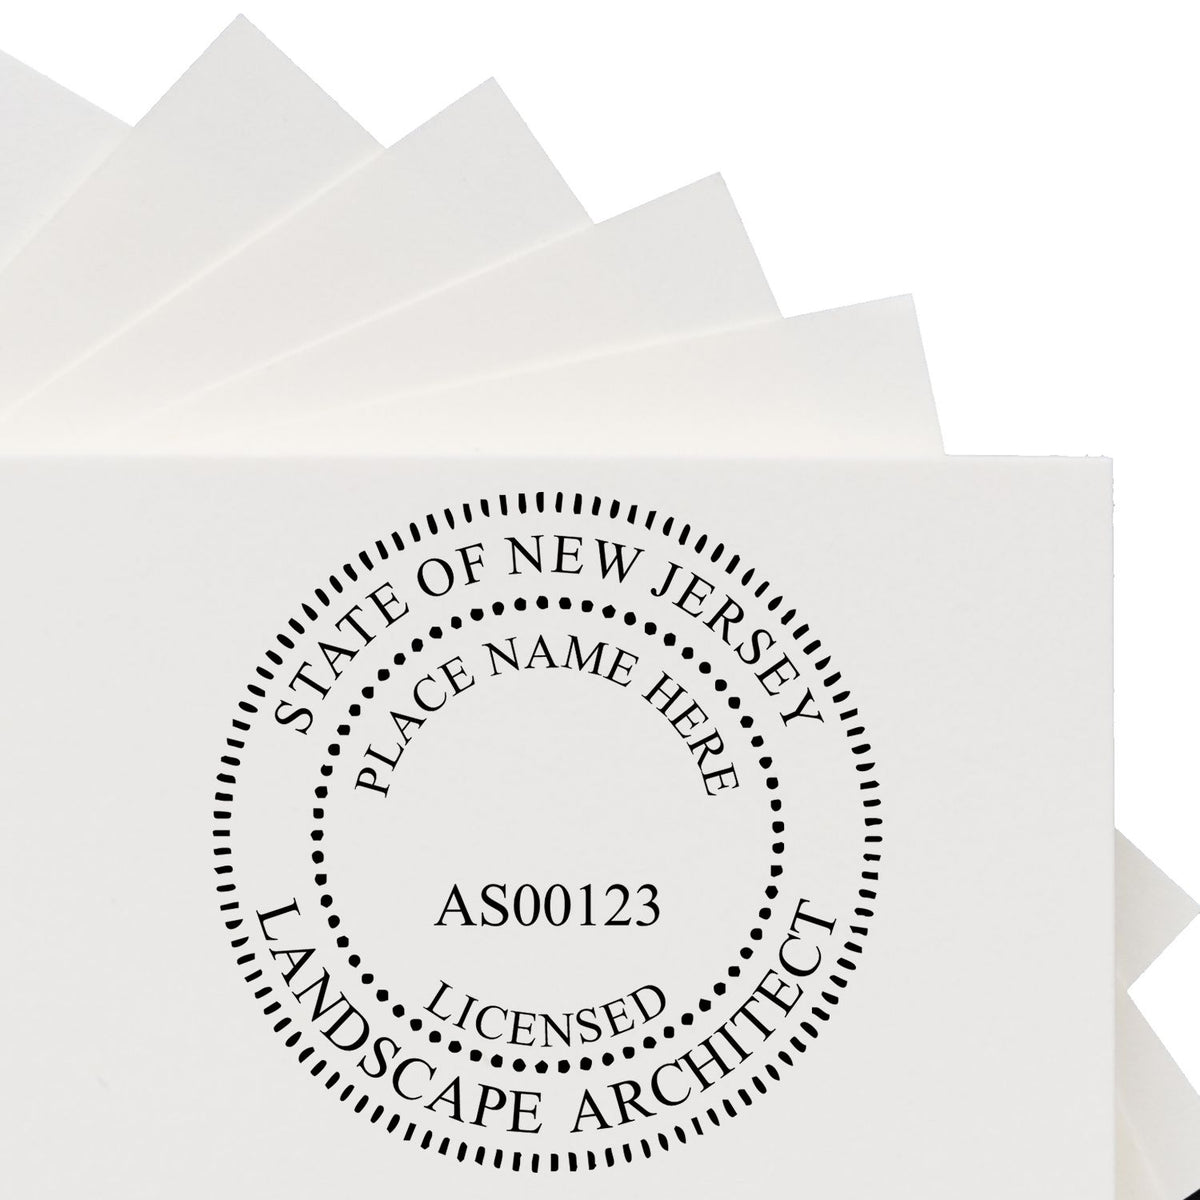 A lifestyle photo showing a stamped image of the Digital New Jersey Landscape Architect Stamp on a piece of paper